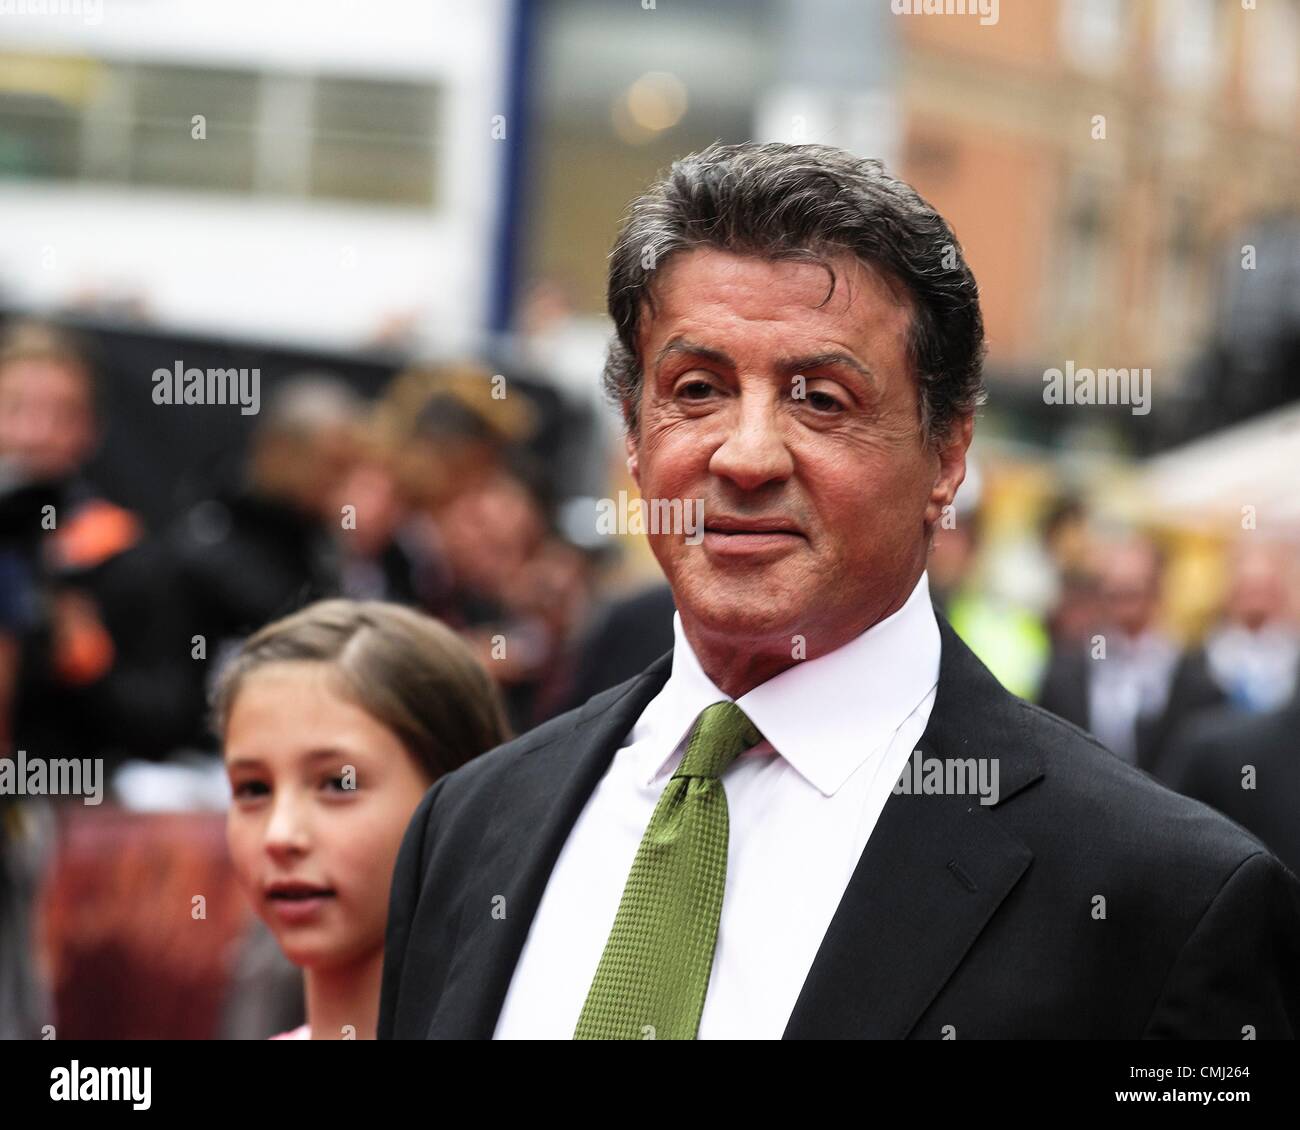 13th Aug 2012. Sylvester Stallone attends UK Premiere of the film Expendables 2 on 13/08/2012 at The Empire Leicester Square, London. Persons pictured: Sylvester Stallone . Picture by Julie Edward Credit:  JEP Celebrity Photos / Alamy Live News Stock Photo